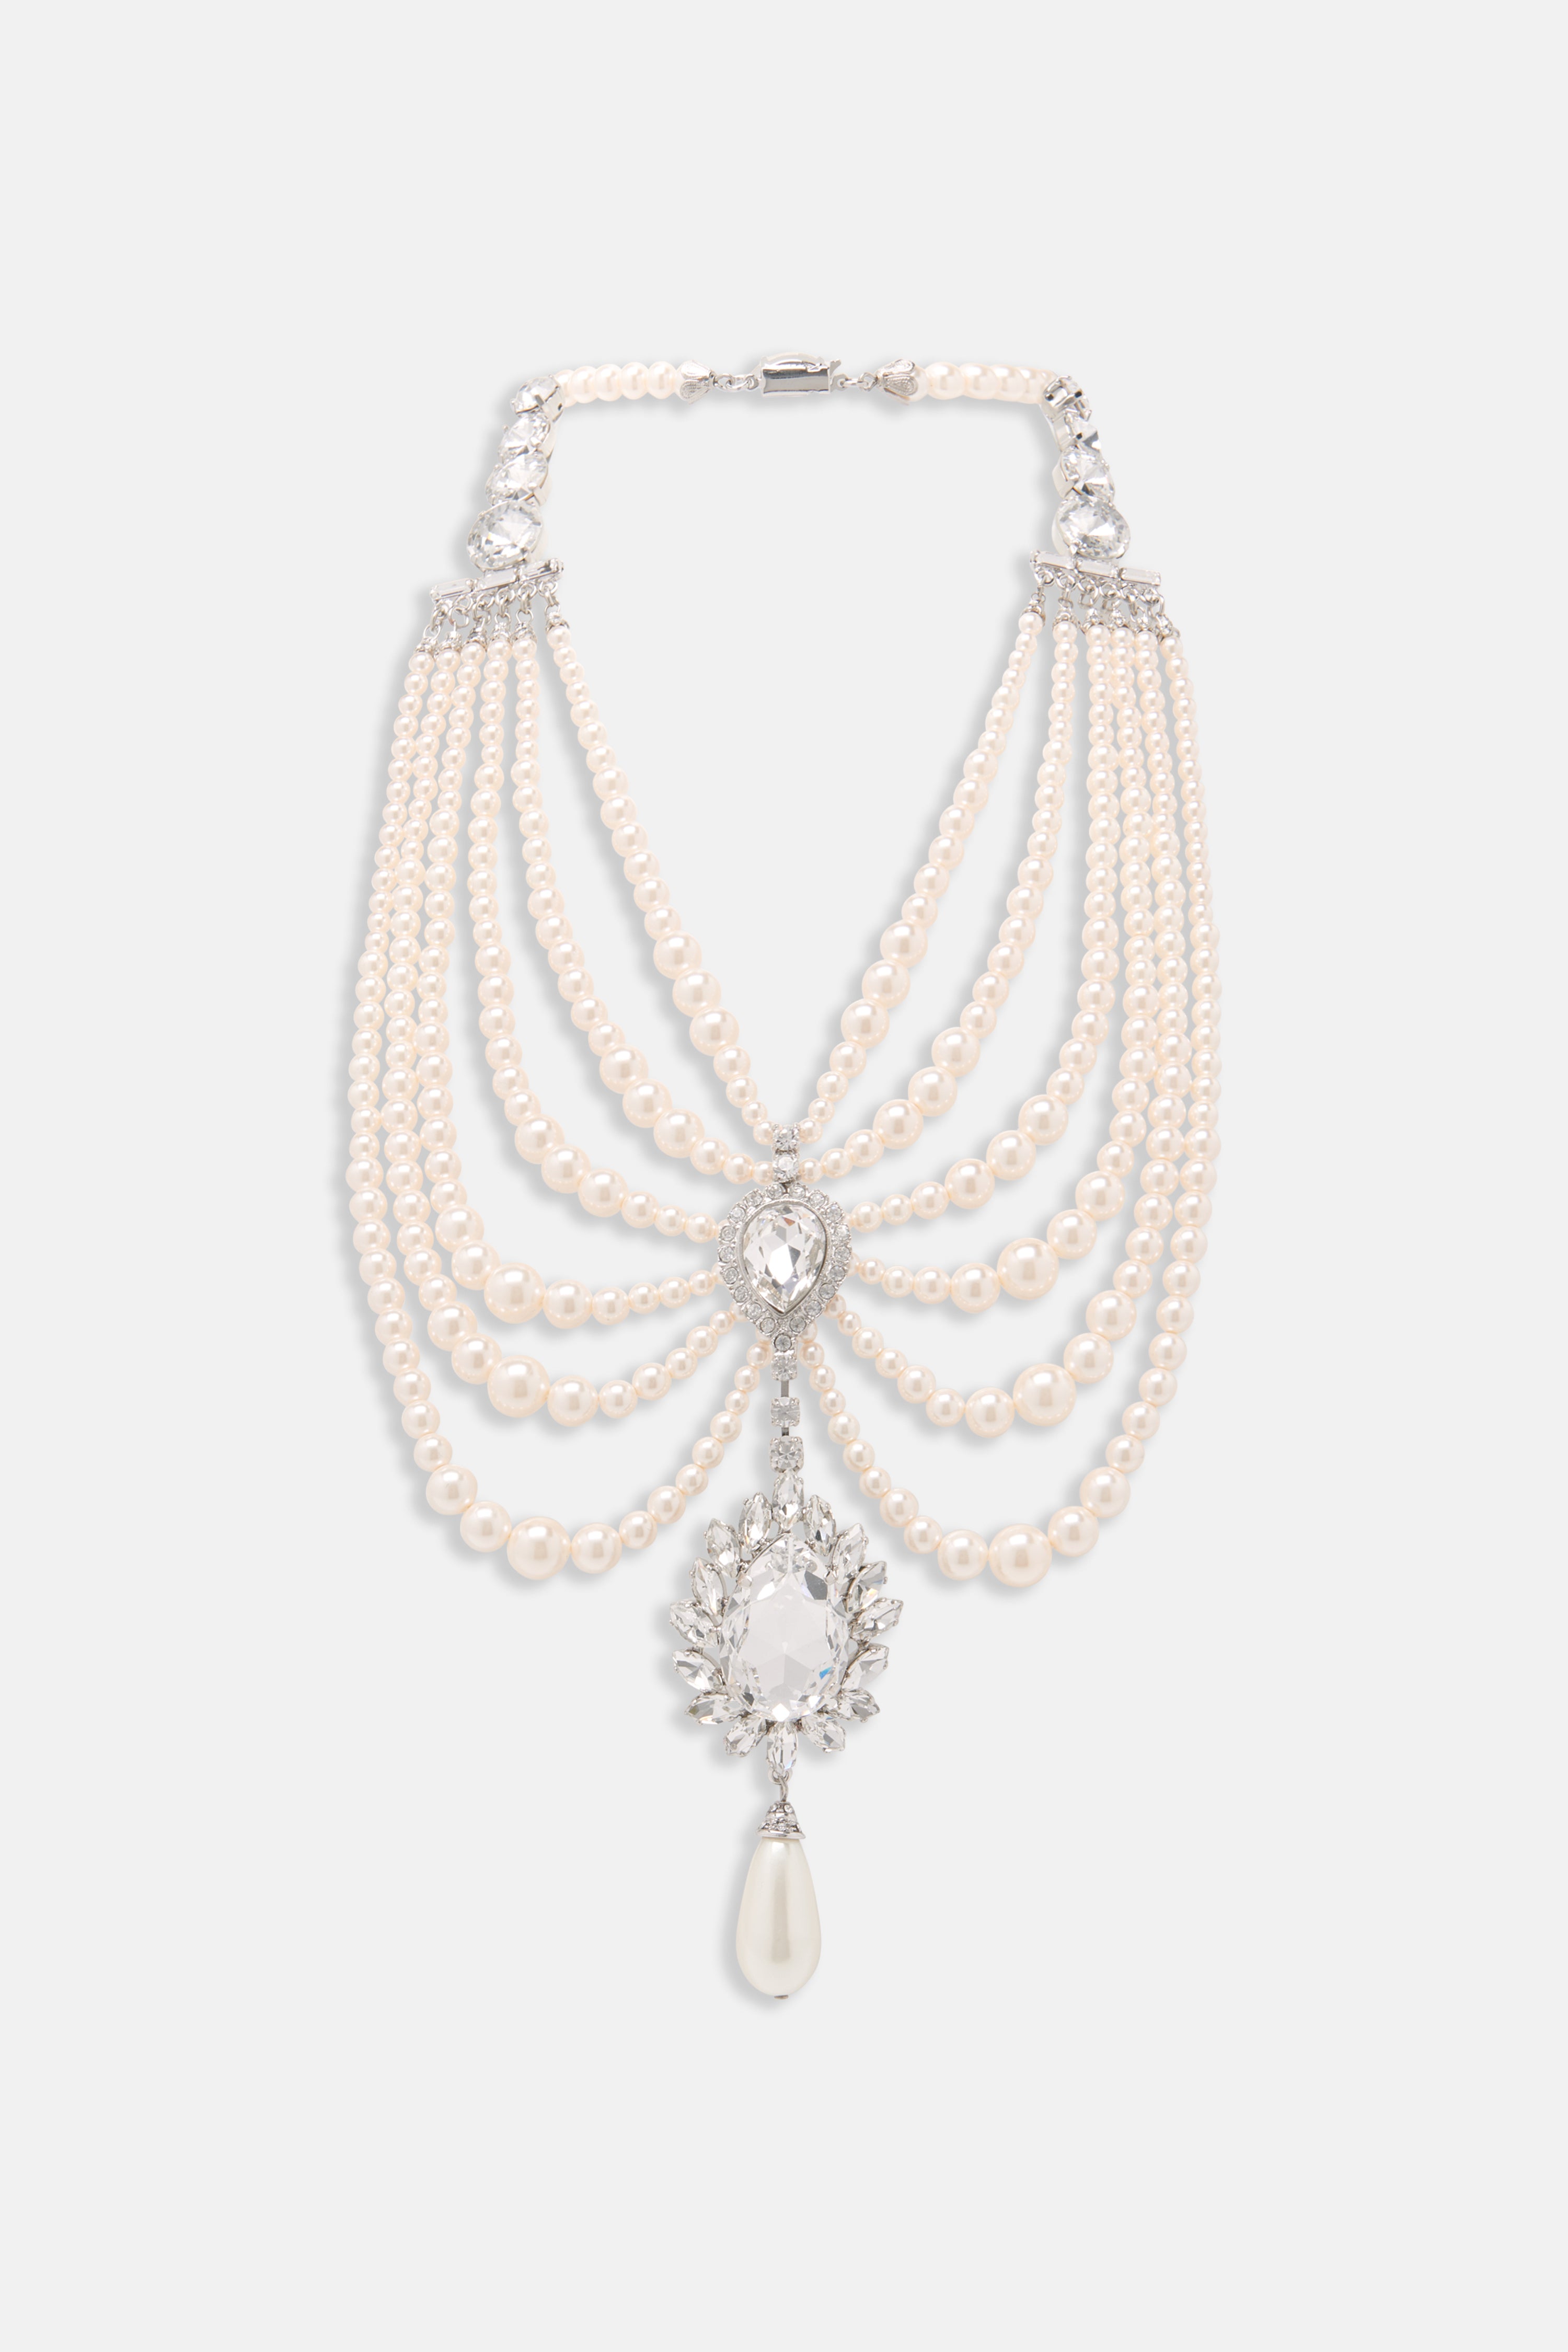 PEARL NECKLACE WITH CRYSTAL EMBELLISHMENT